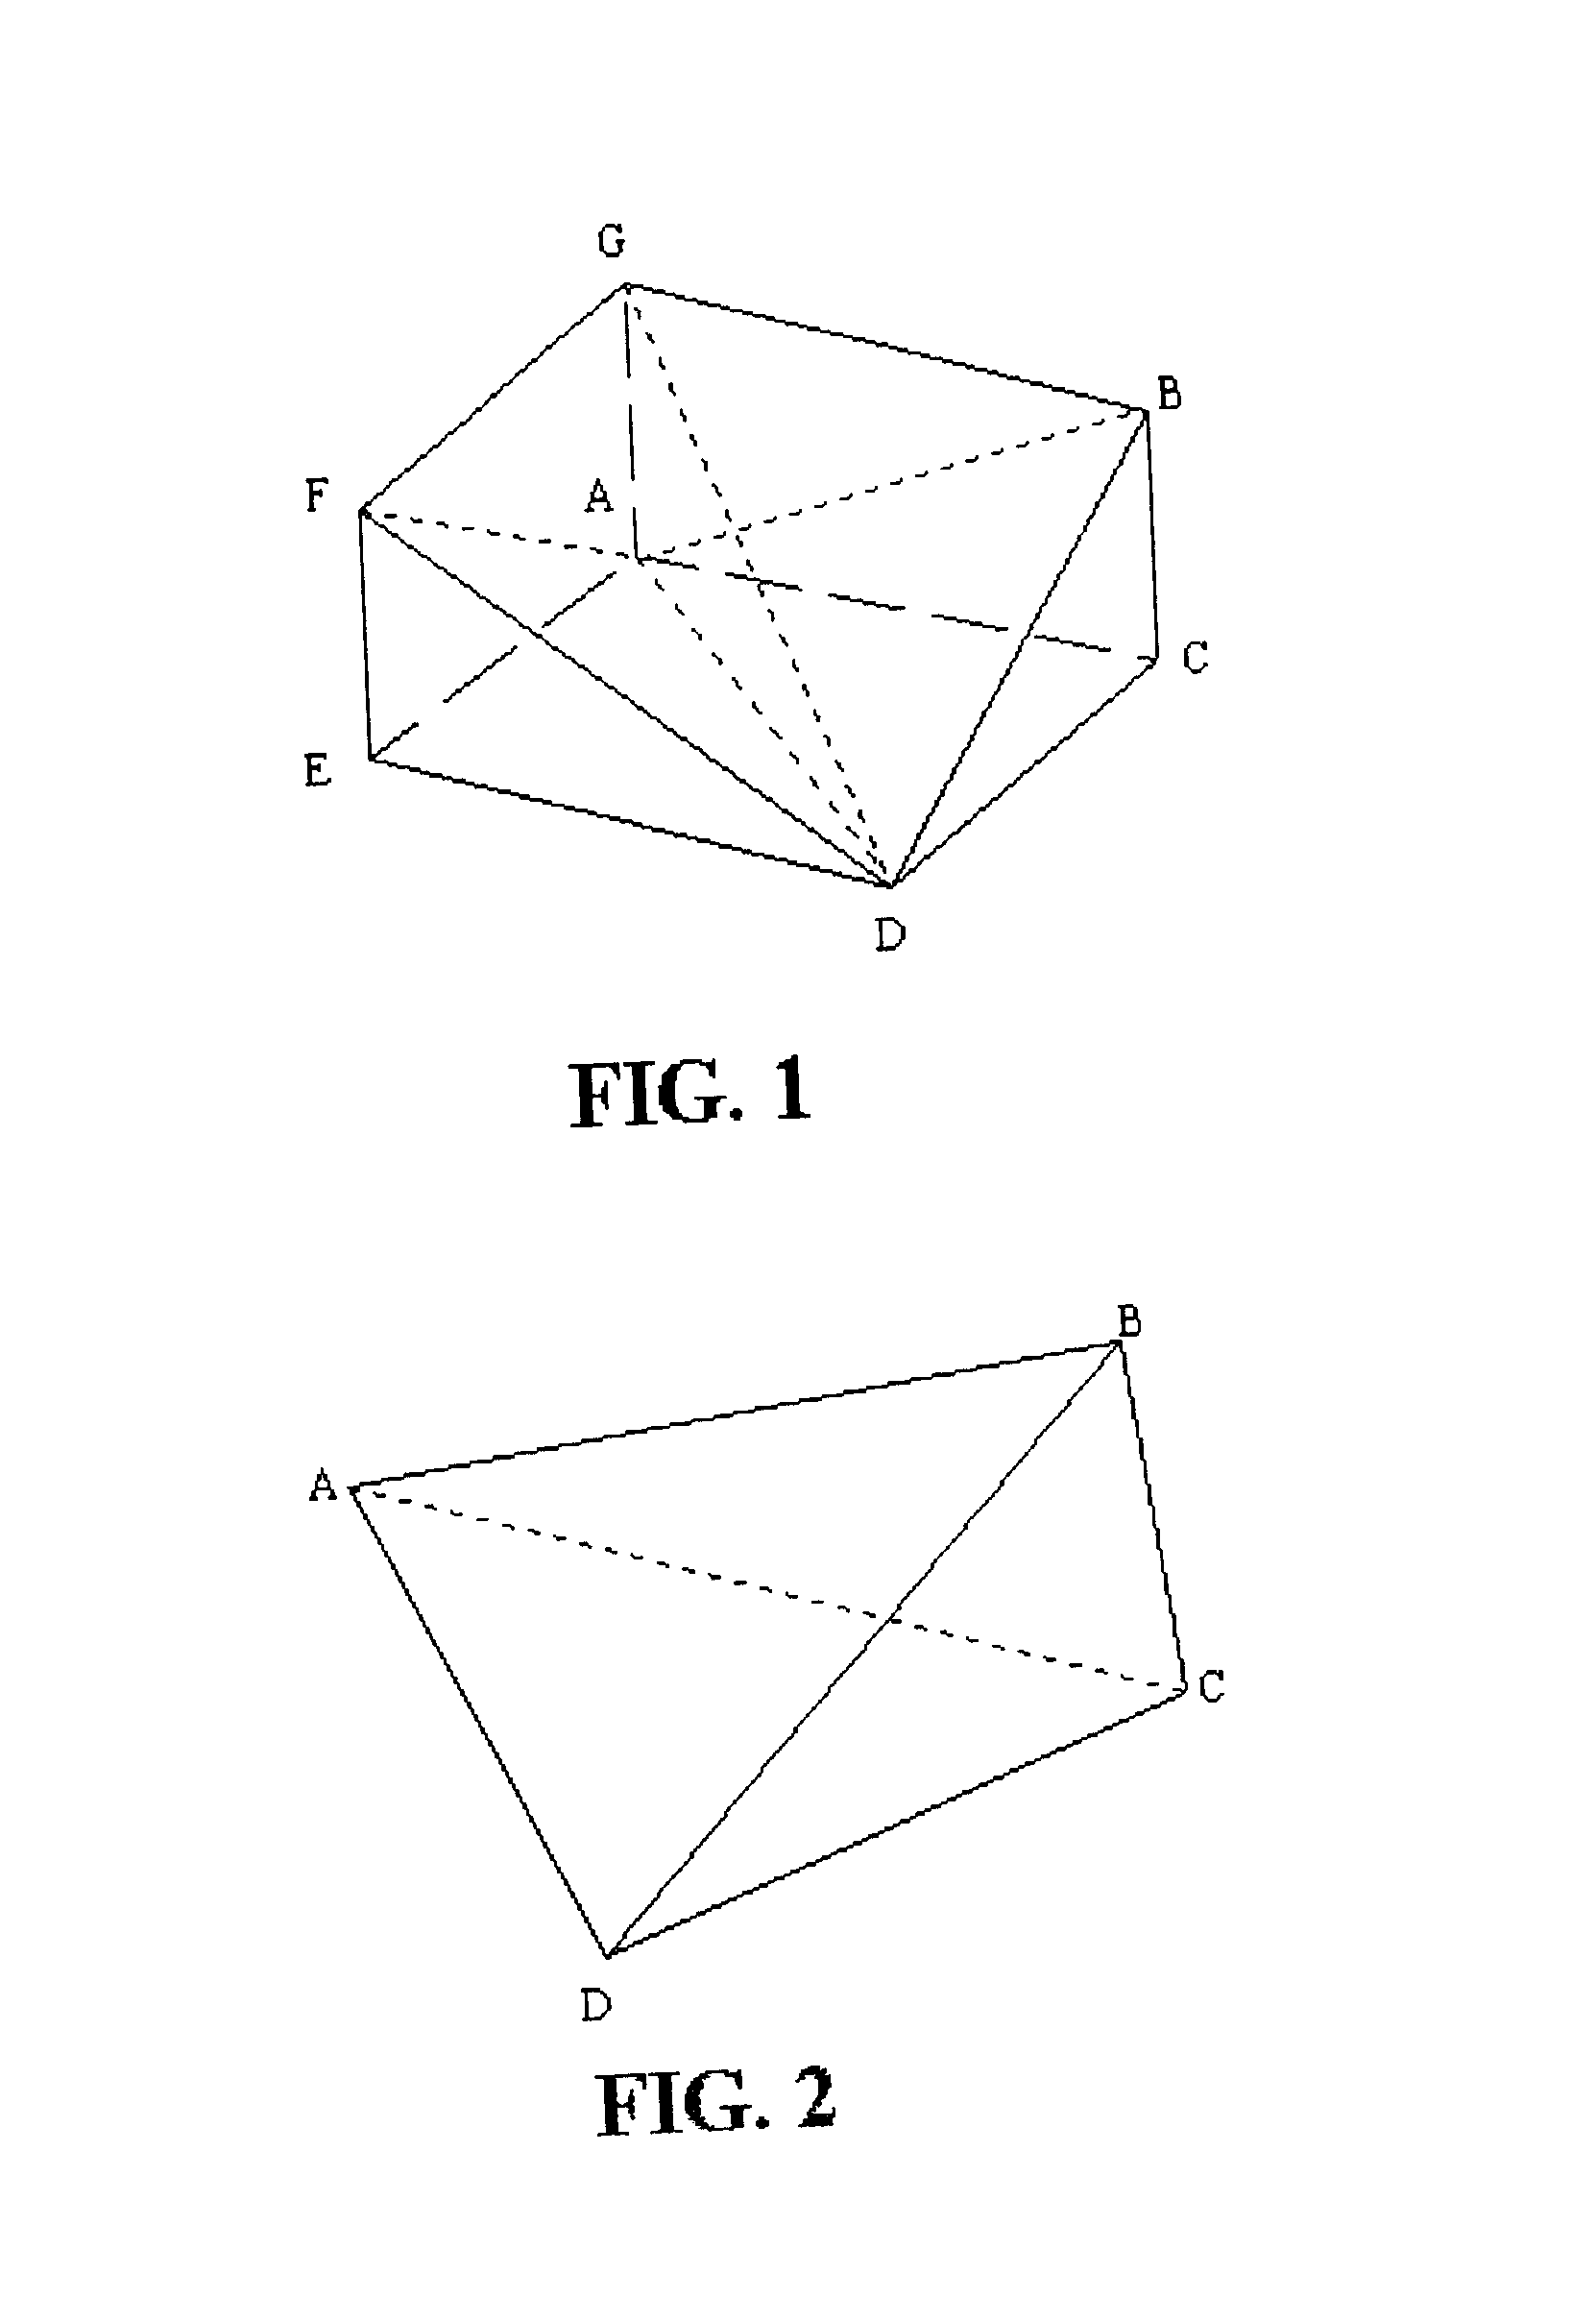 Longest-edge refinement and derefinement system and method for automatic mesh generation